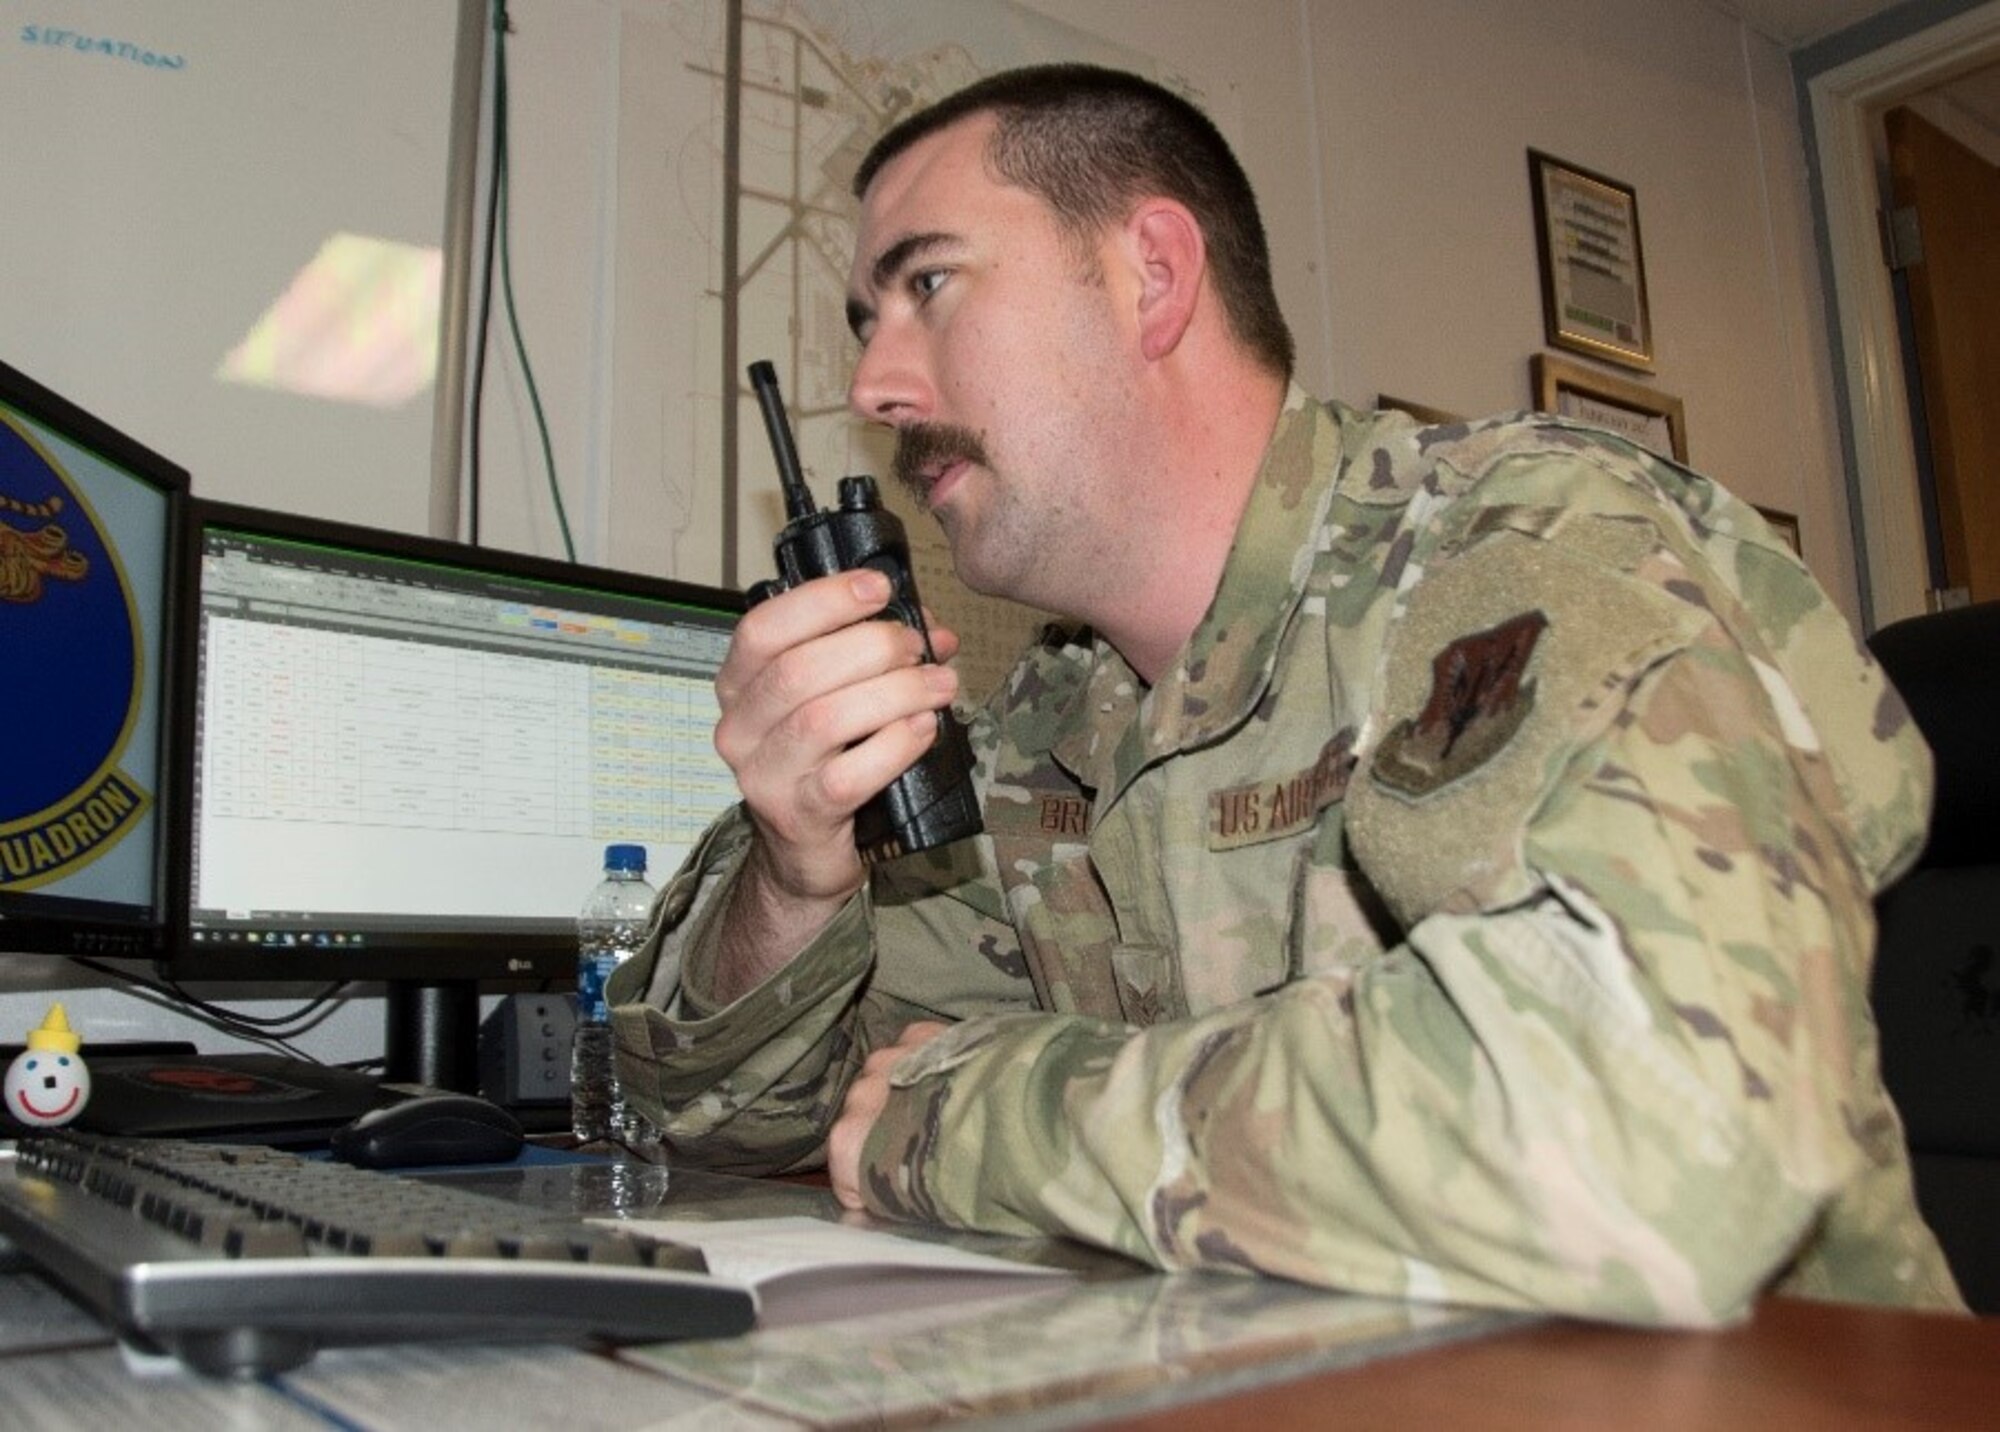 U.S. Air Force Staff Sgt. Matthew Brown, 24th Fighter Squadron maintenance operations center production controller, communicates over a radio at U.S. Naval Air Station Joint Reserve Base Fort Worth, Texas, Feb. 5, 2021. Production controllers relay information, such as status changes, to expediters on the flightline. (U.S. Air Force photo by Kedesha Pennant)